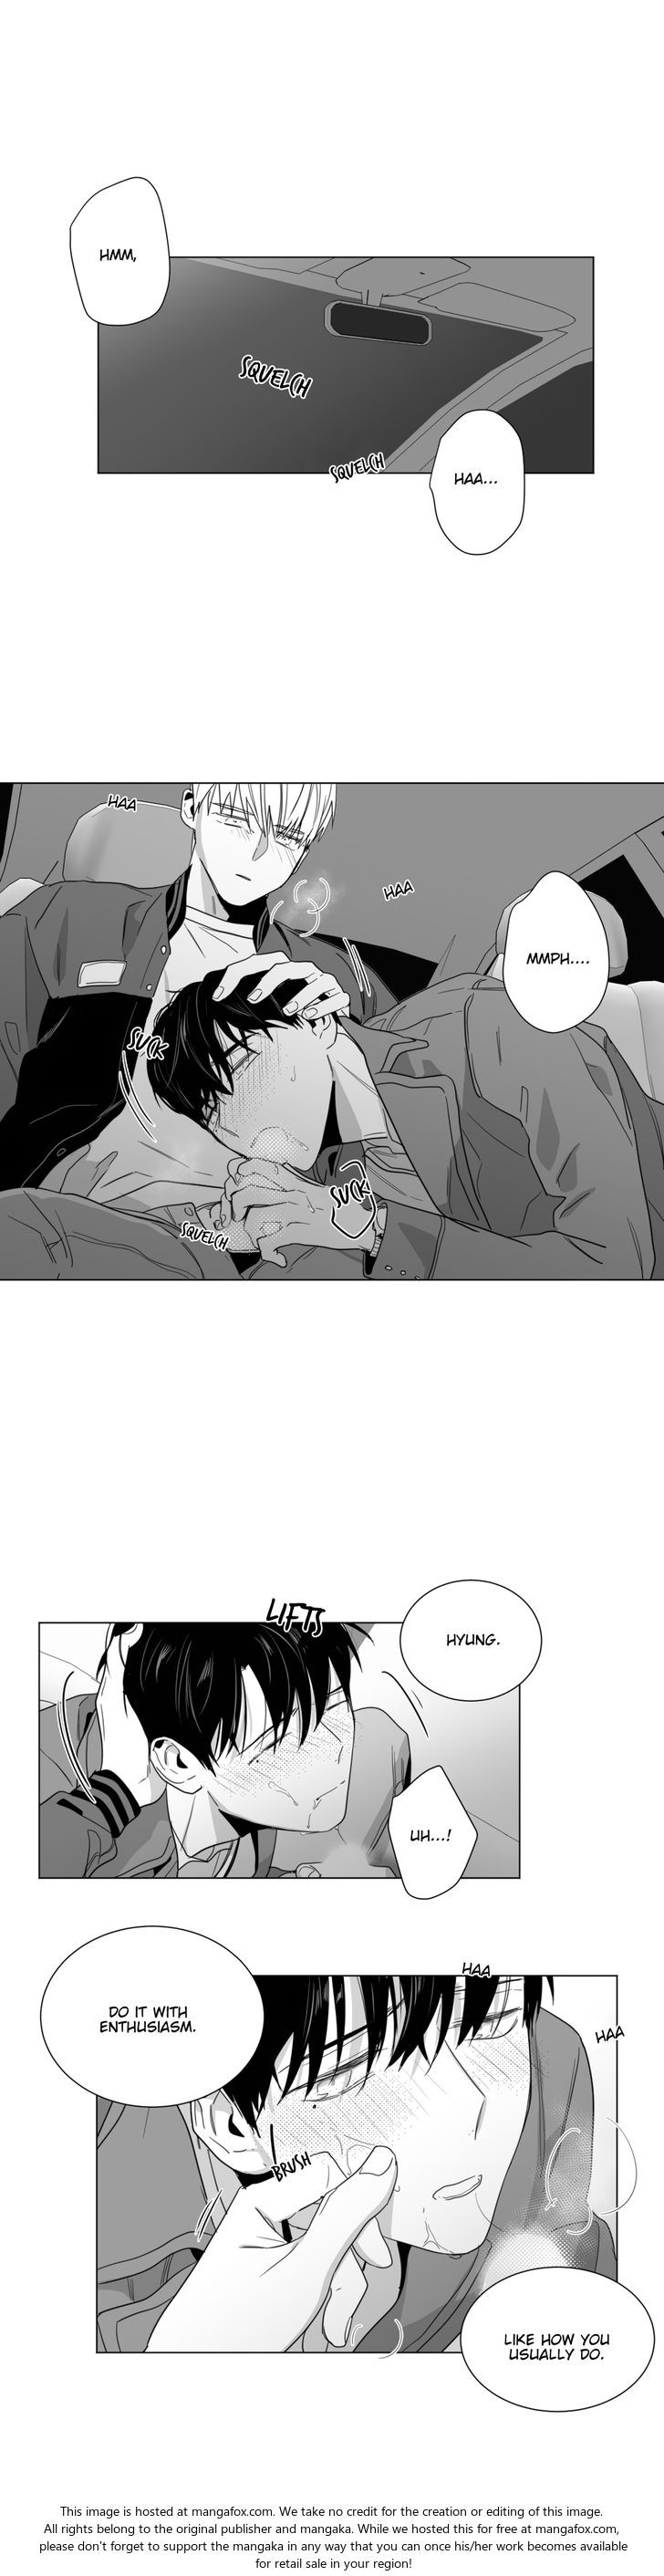 Lover Boy (Lezhin) Chapter 026 page 5